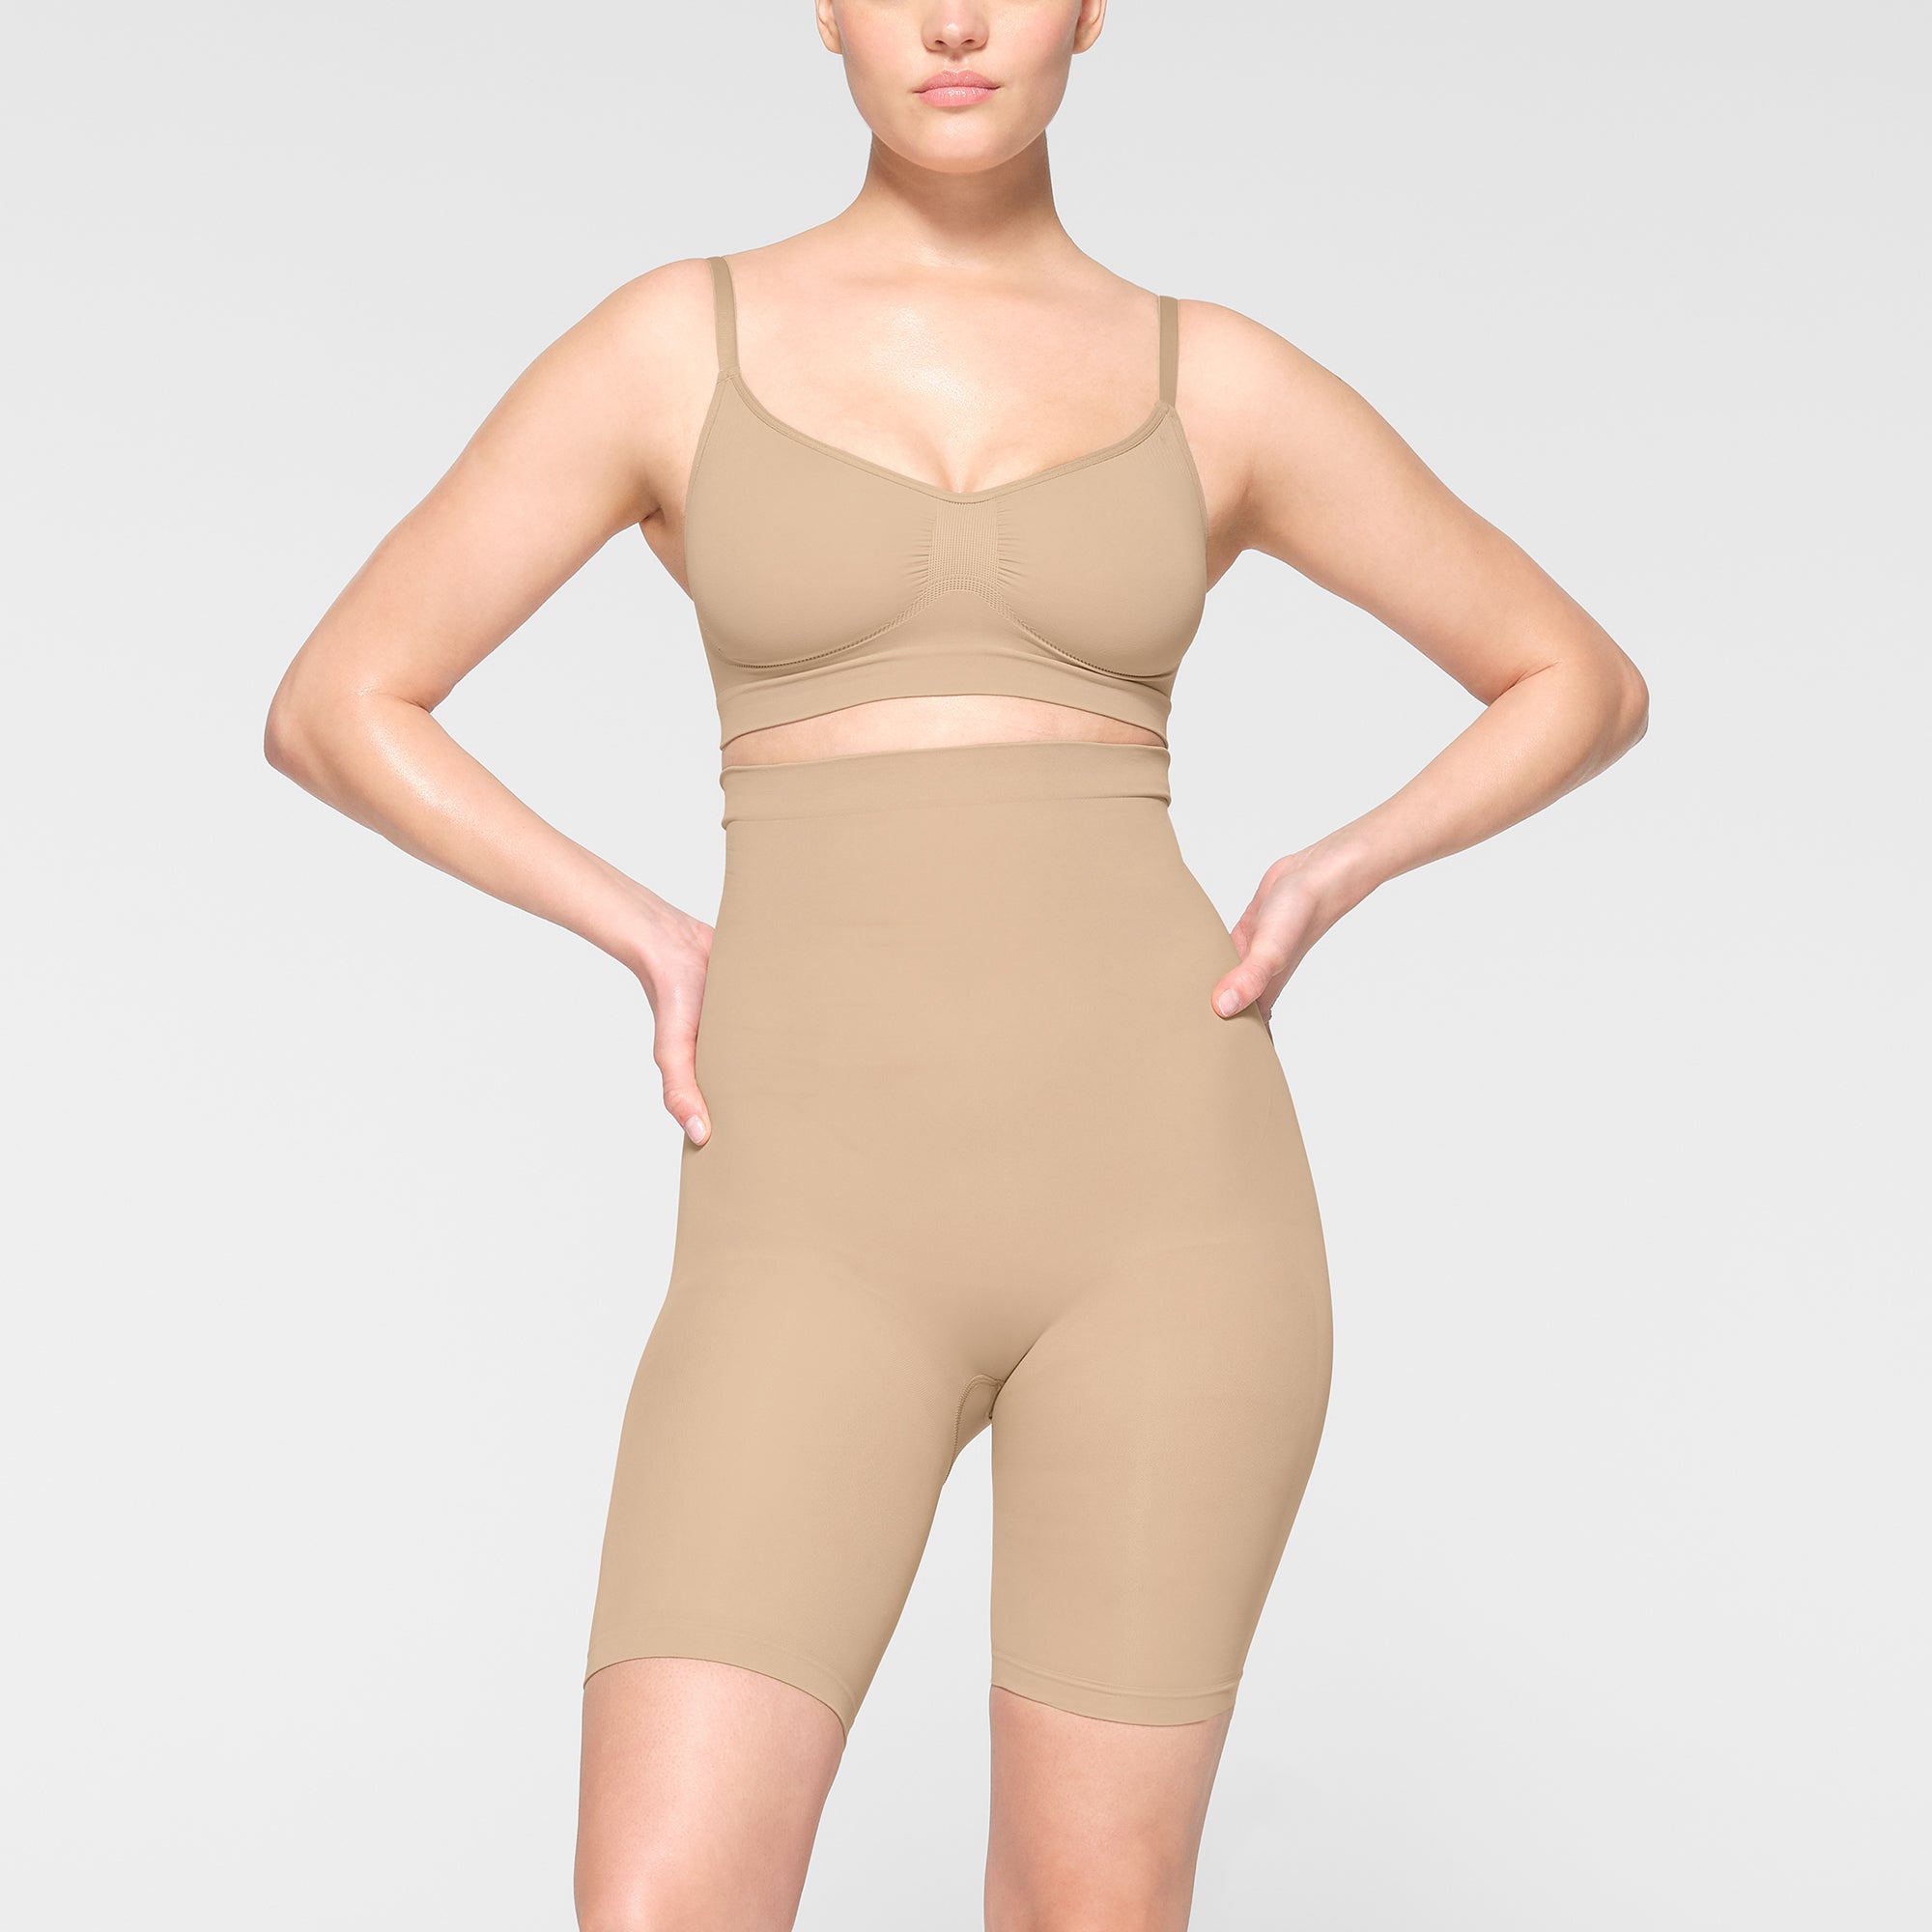 Women's Skims Sculpting Seamless Above The Knee Shorts, Size XX